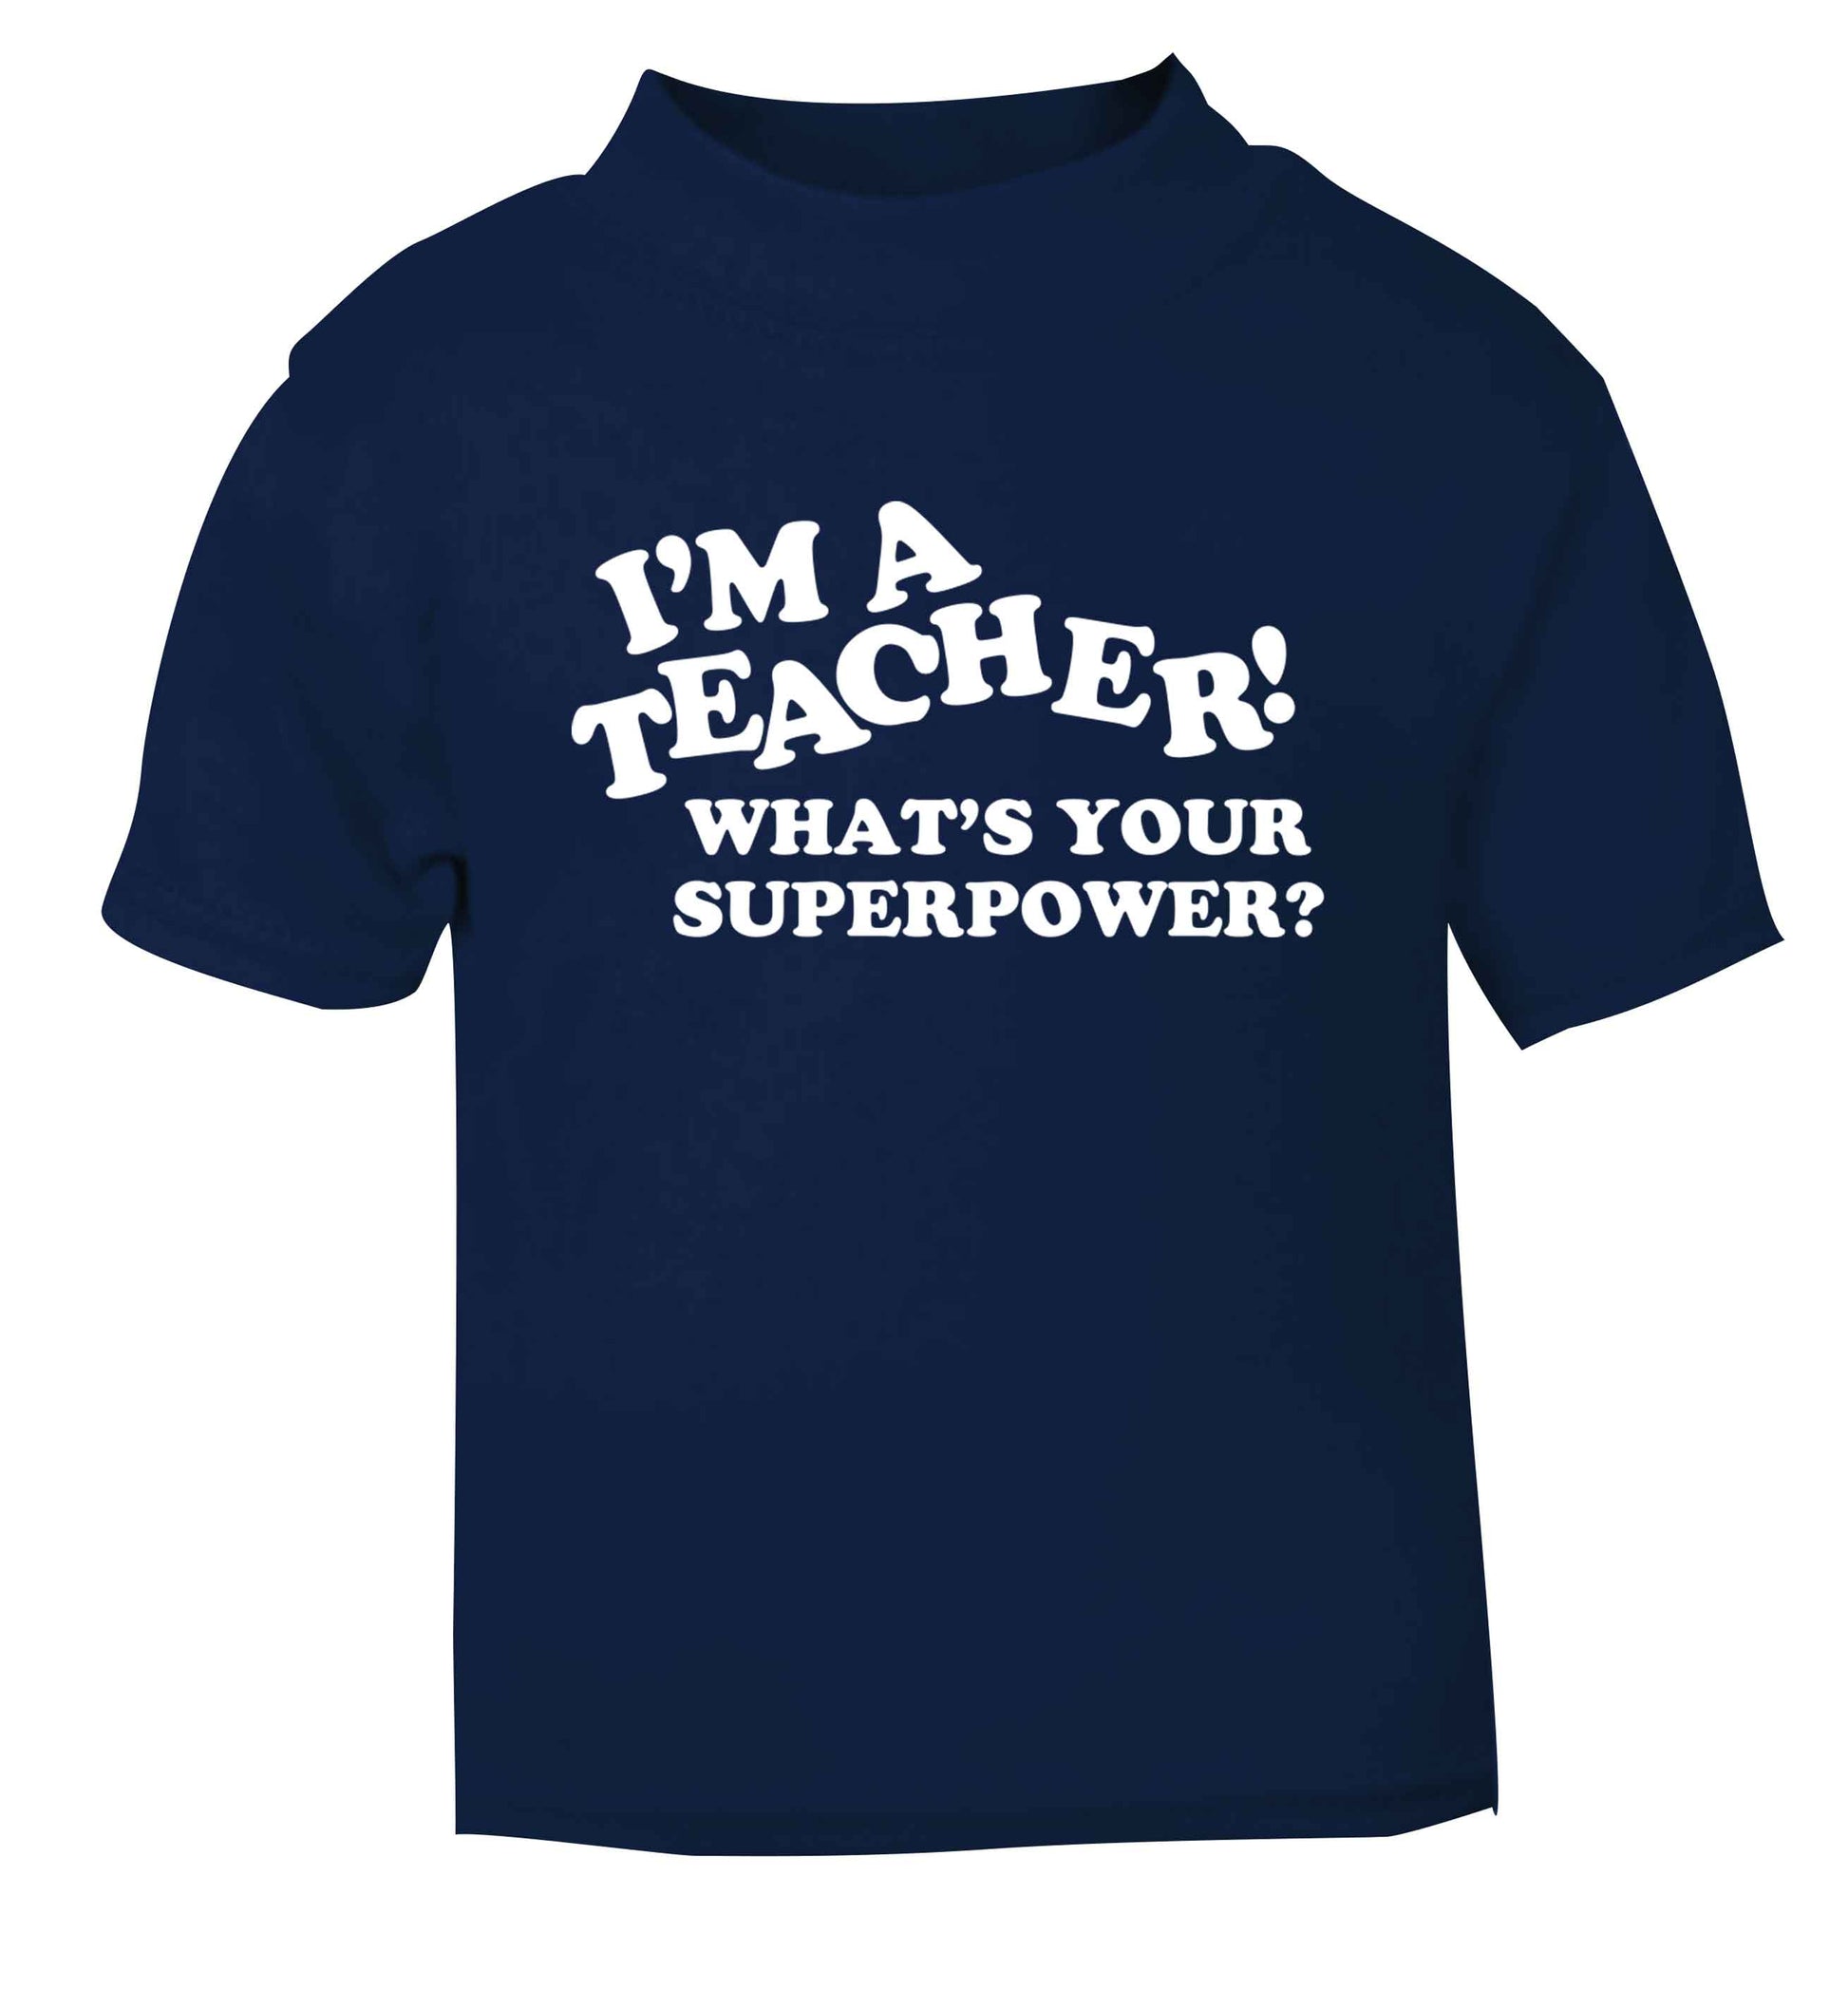 I'm a teacher what's your superpower?! navy baby toddler Tshirt 2 Years